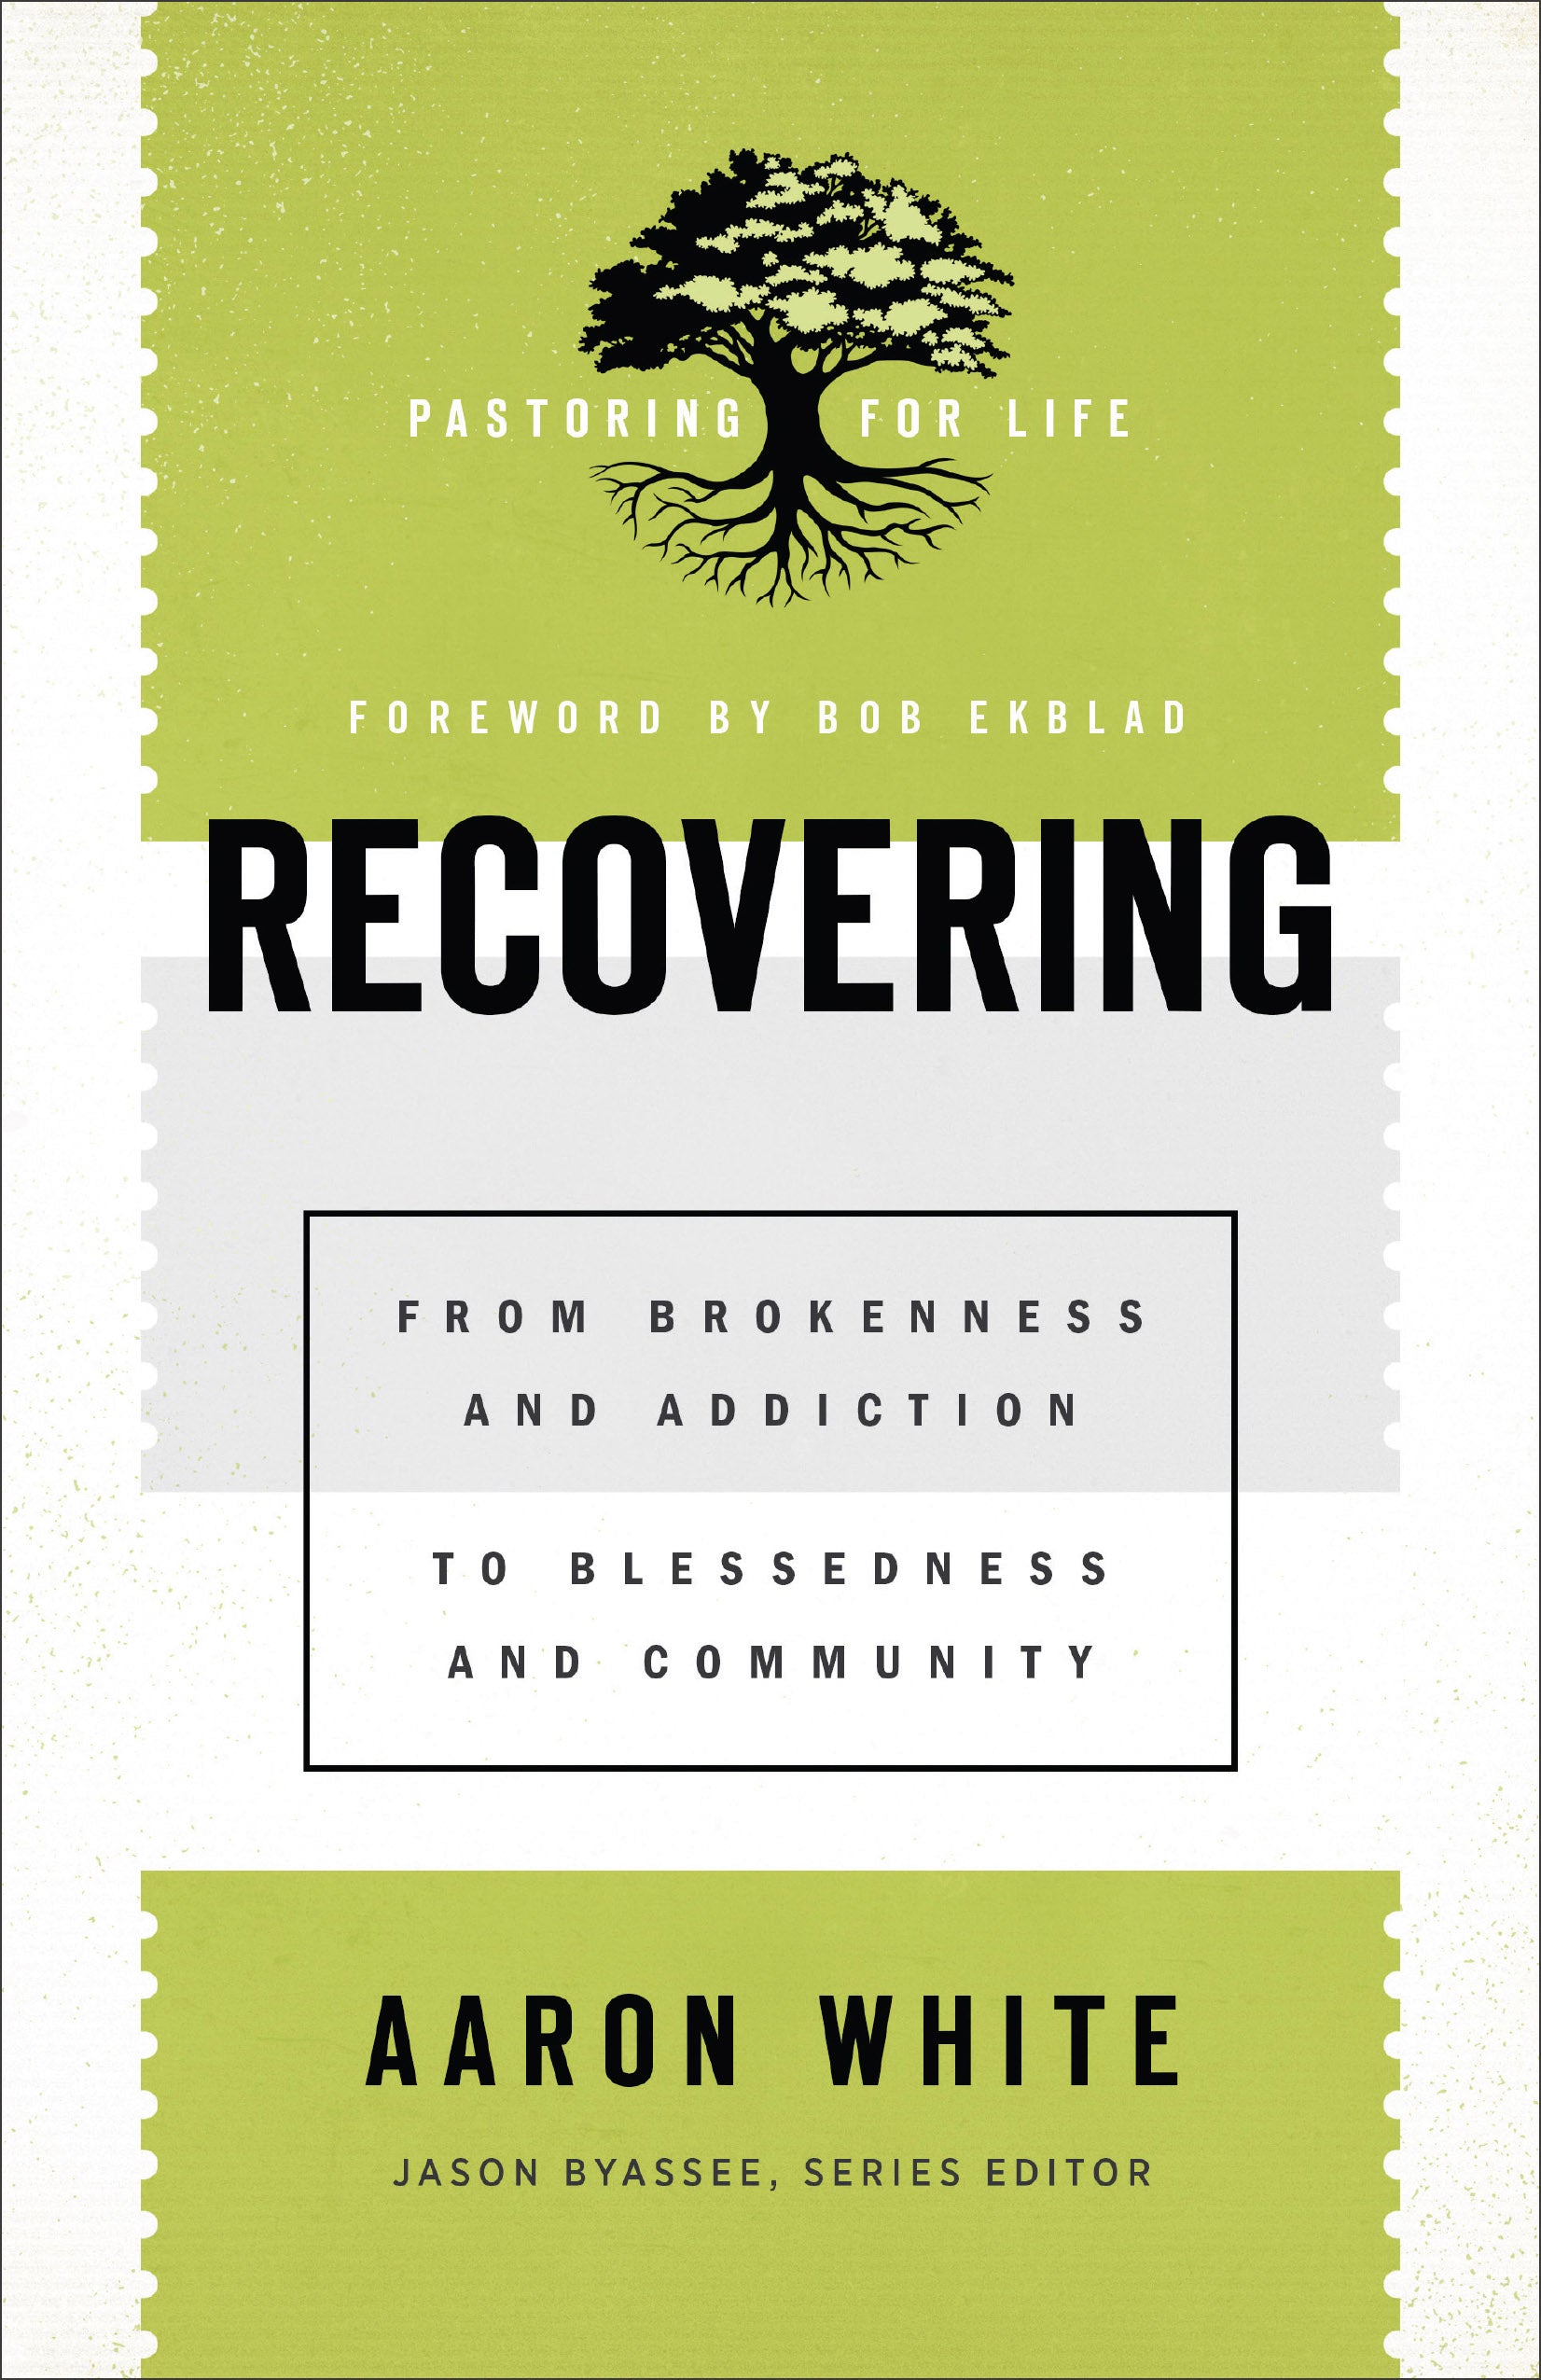 Image of Recovering: From Brokenness and Addiction to Blessedness and Community other